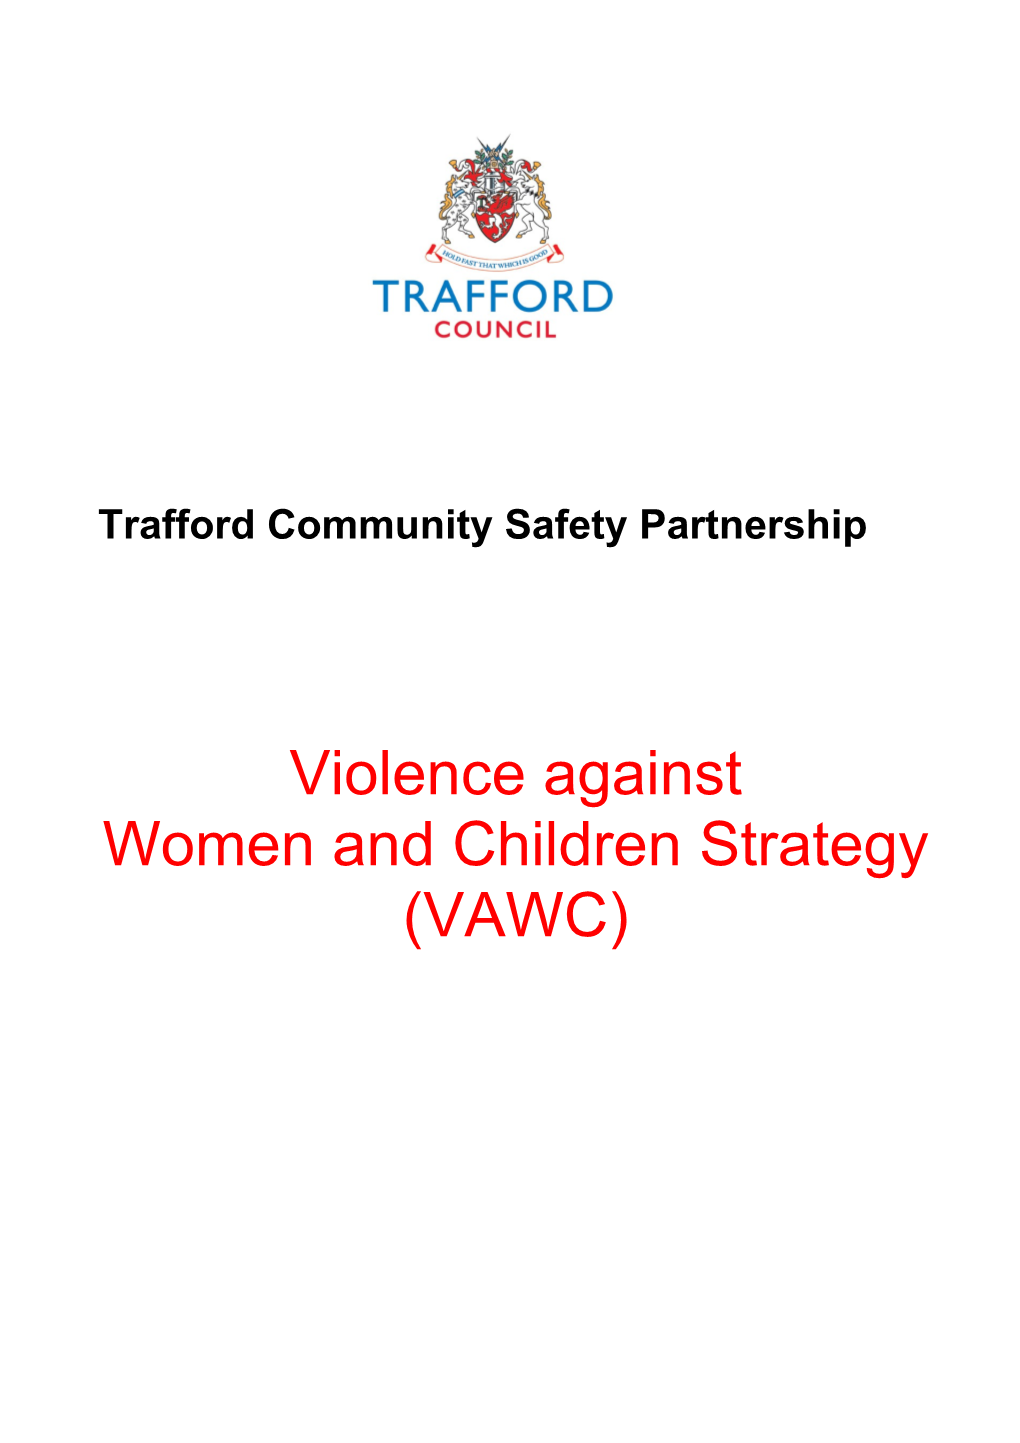 Definition of Violence Against Women and Girls (VAWG)